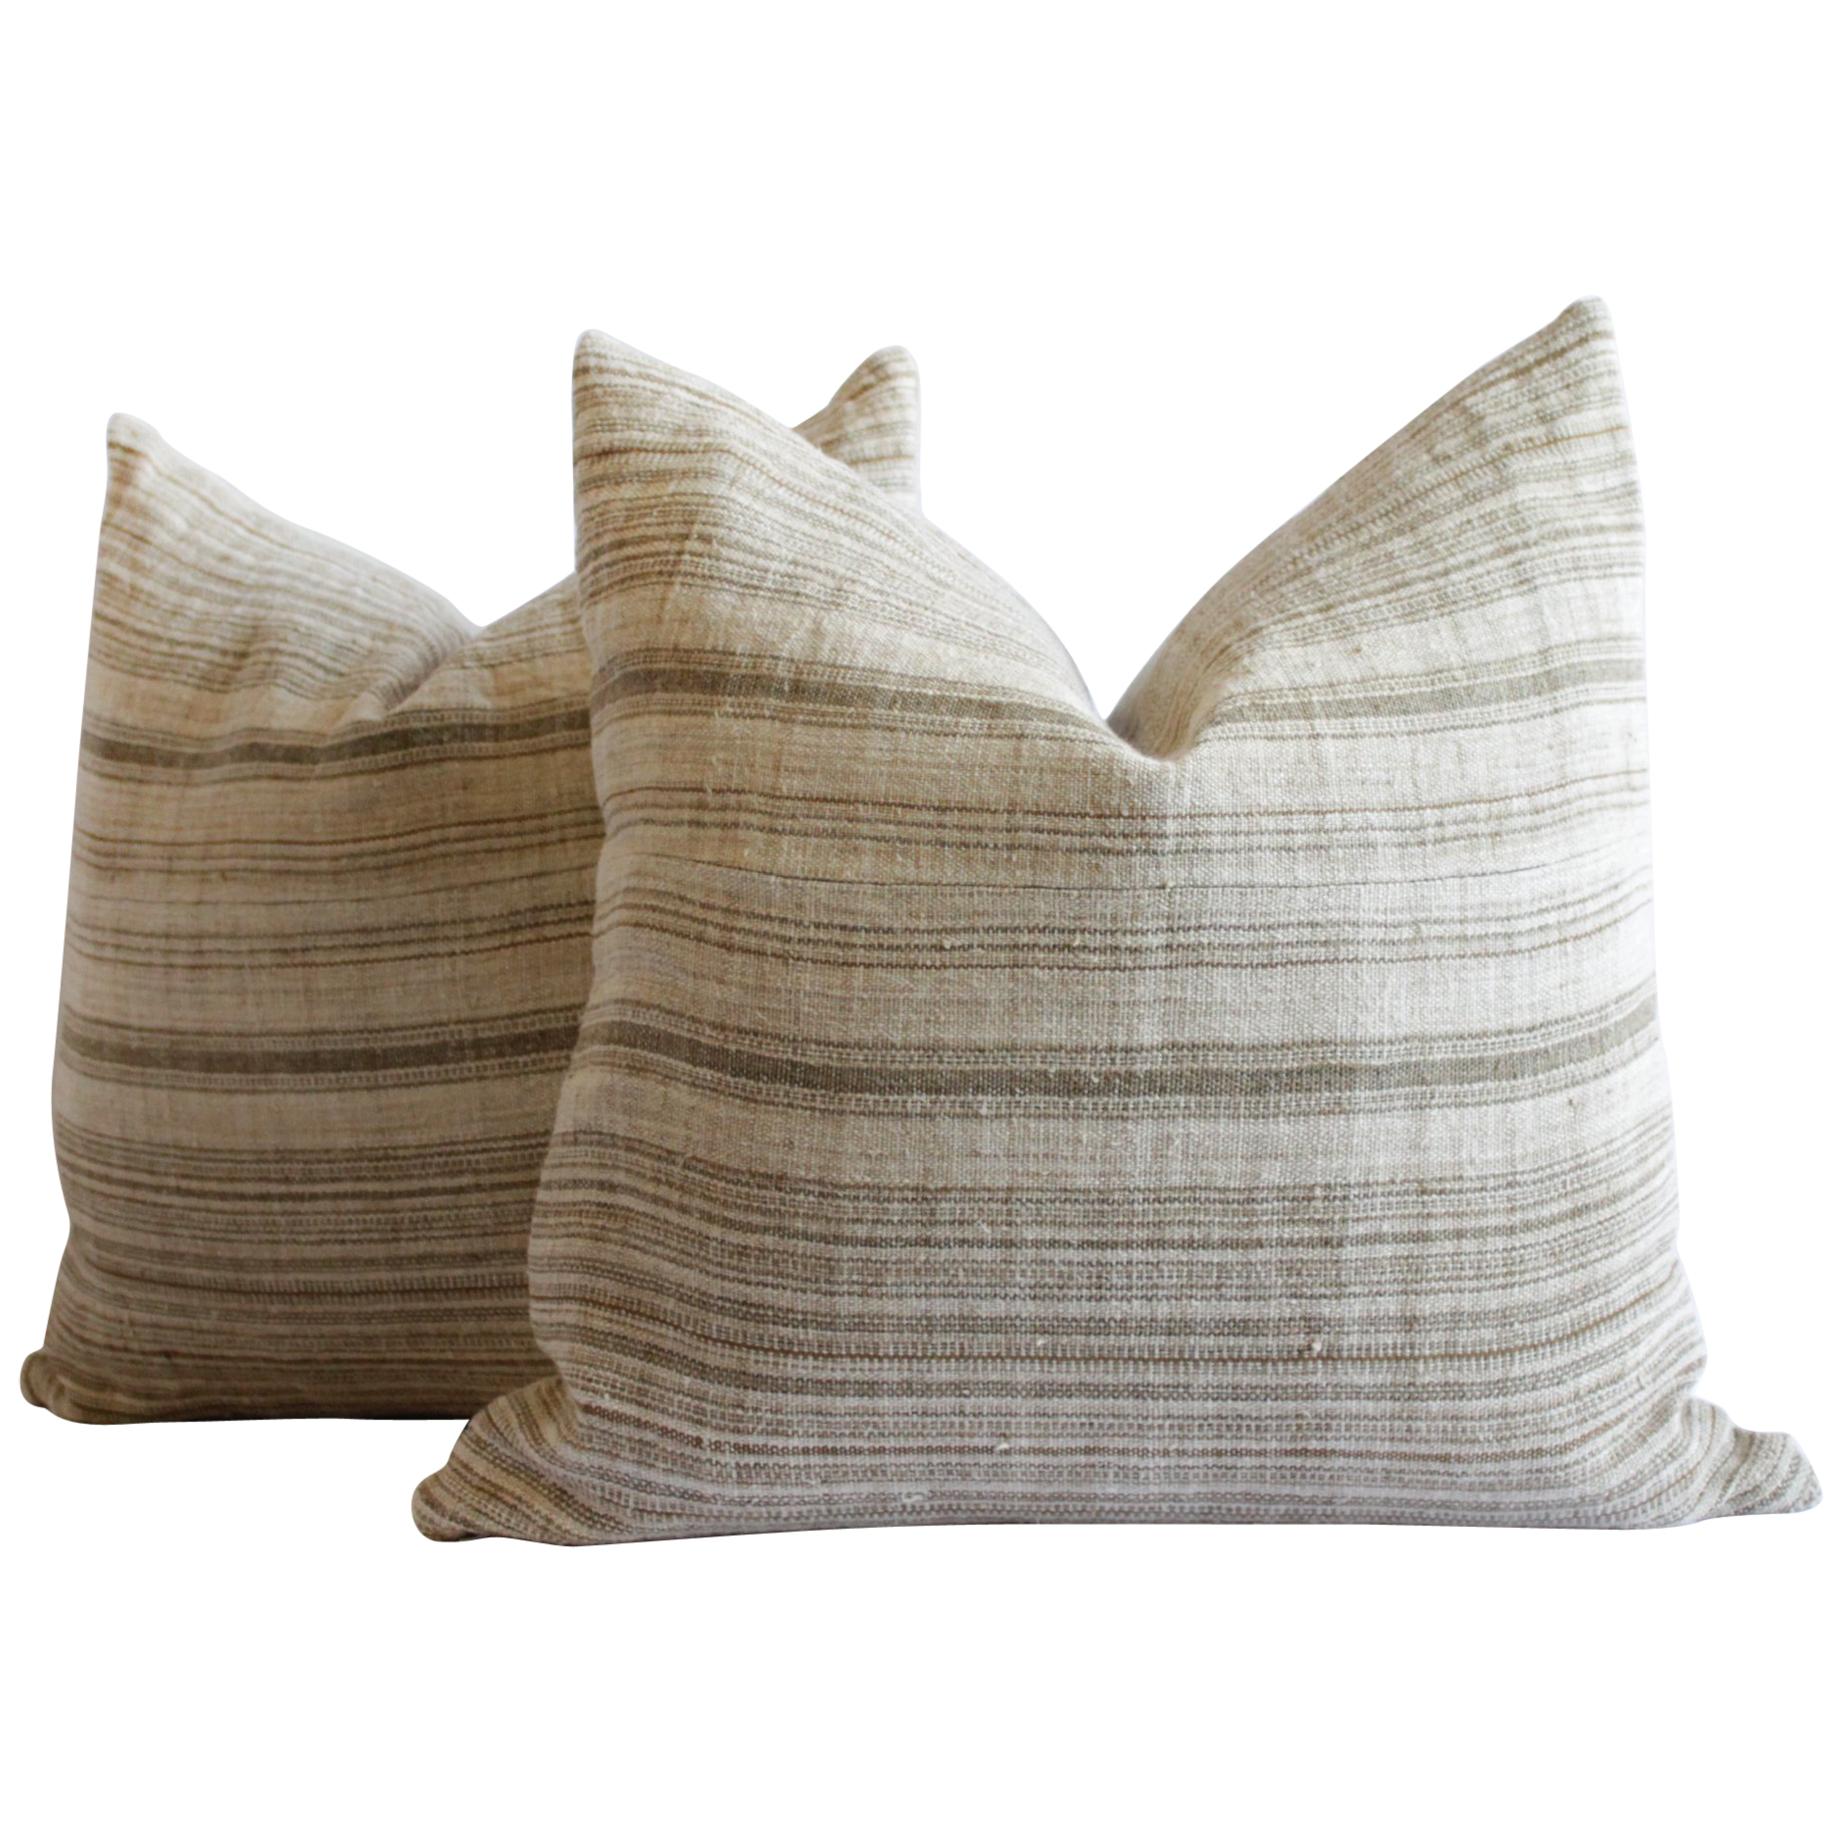 Antique Homespun Linen Pillows in Natural and Brown Stripe by Full Bloom Cottage